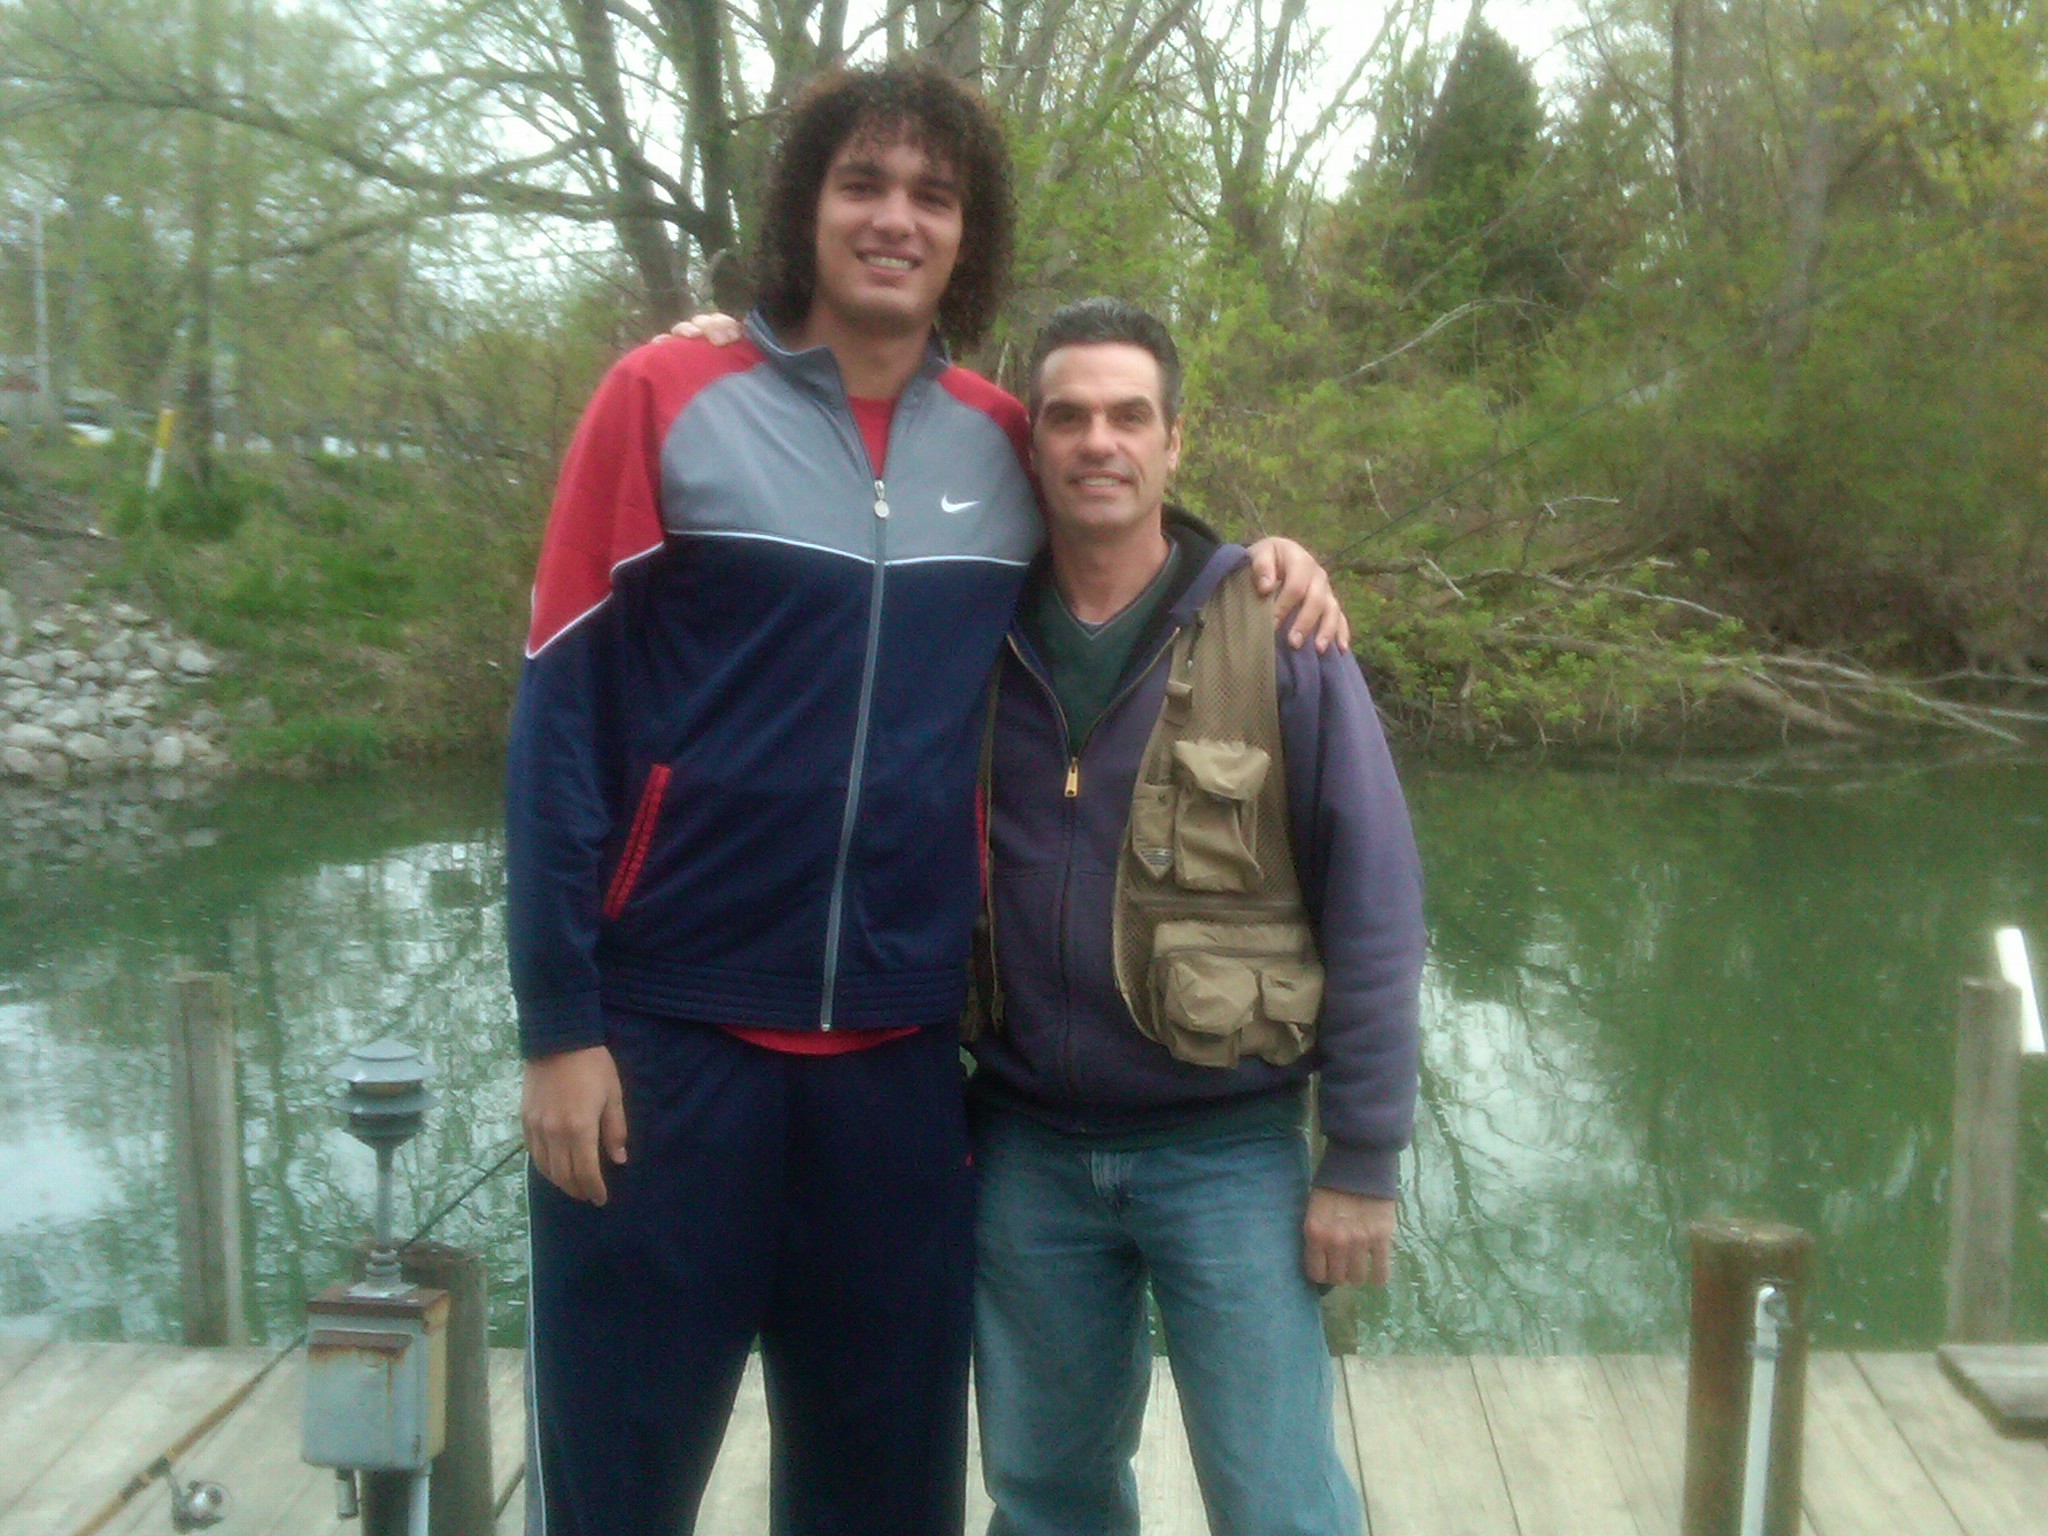 Anderson Varejao and Jerry Lynch fishing at their favorite spot.